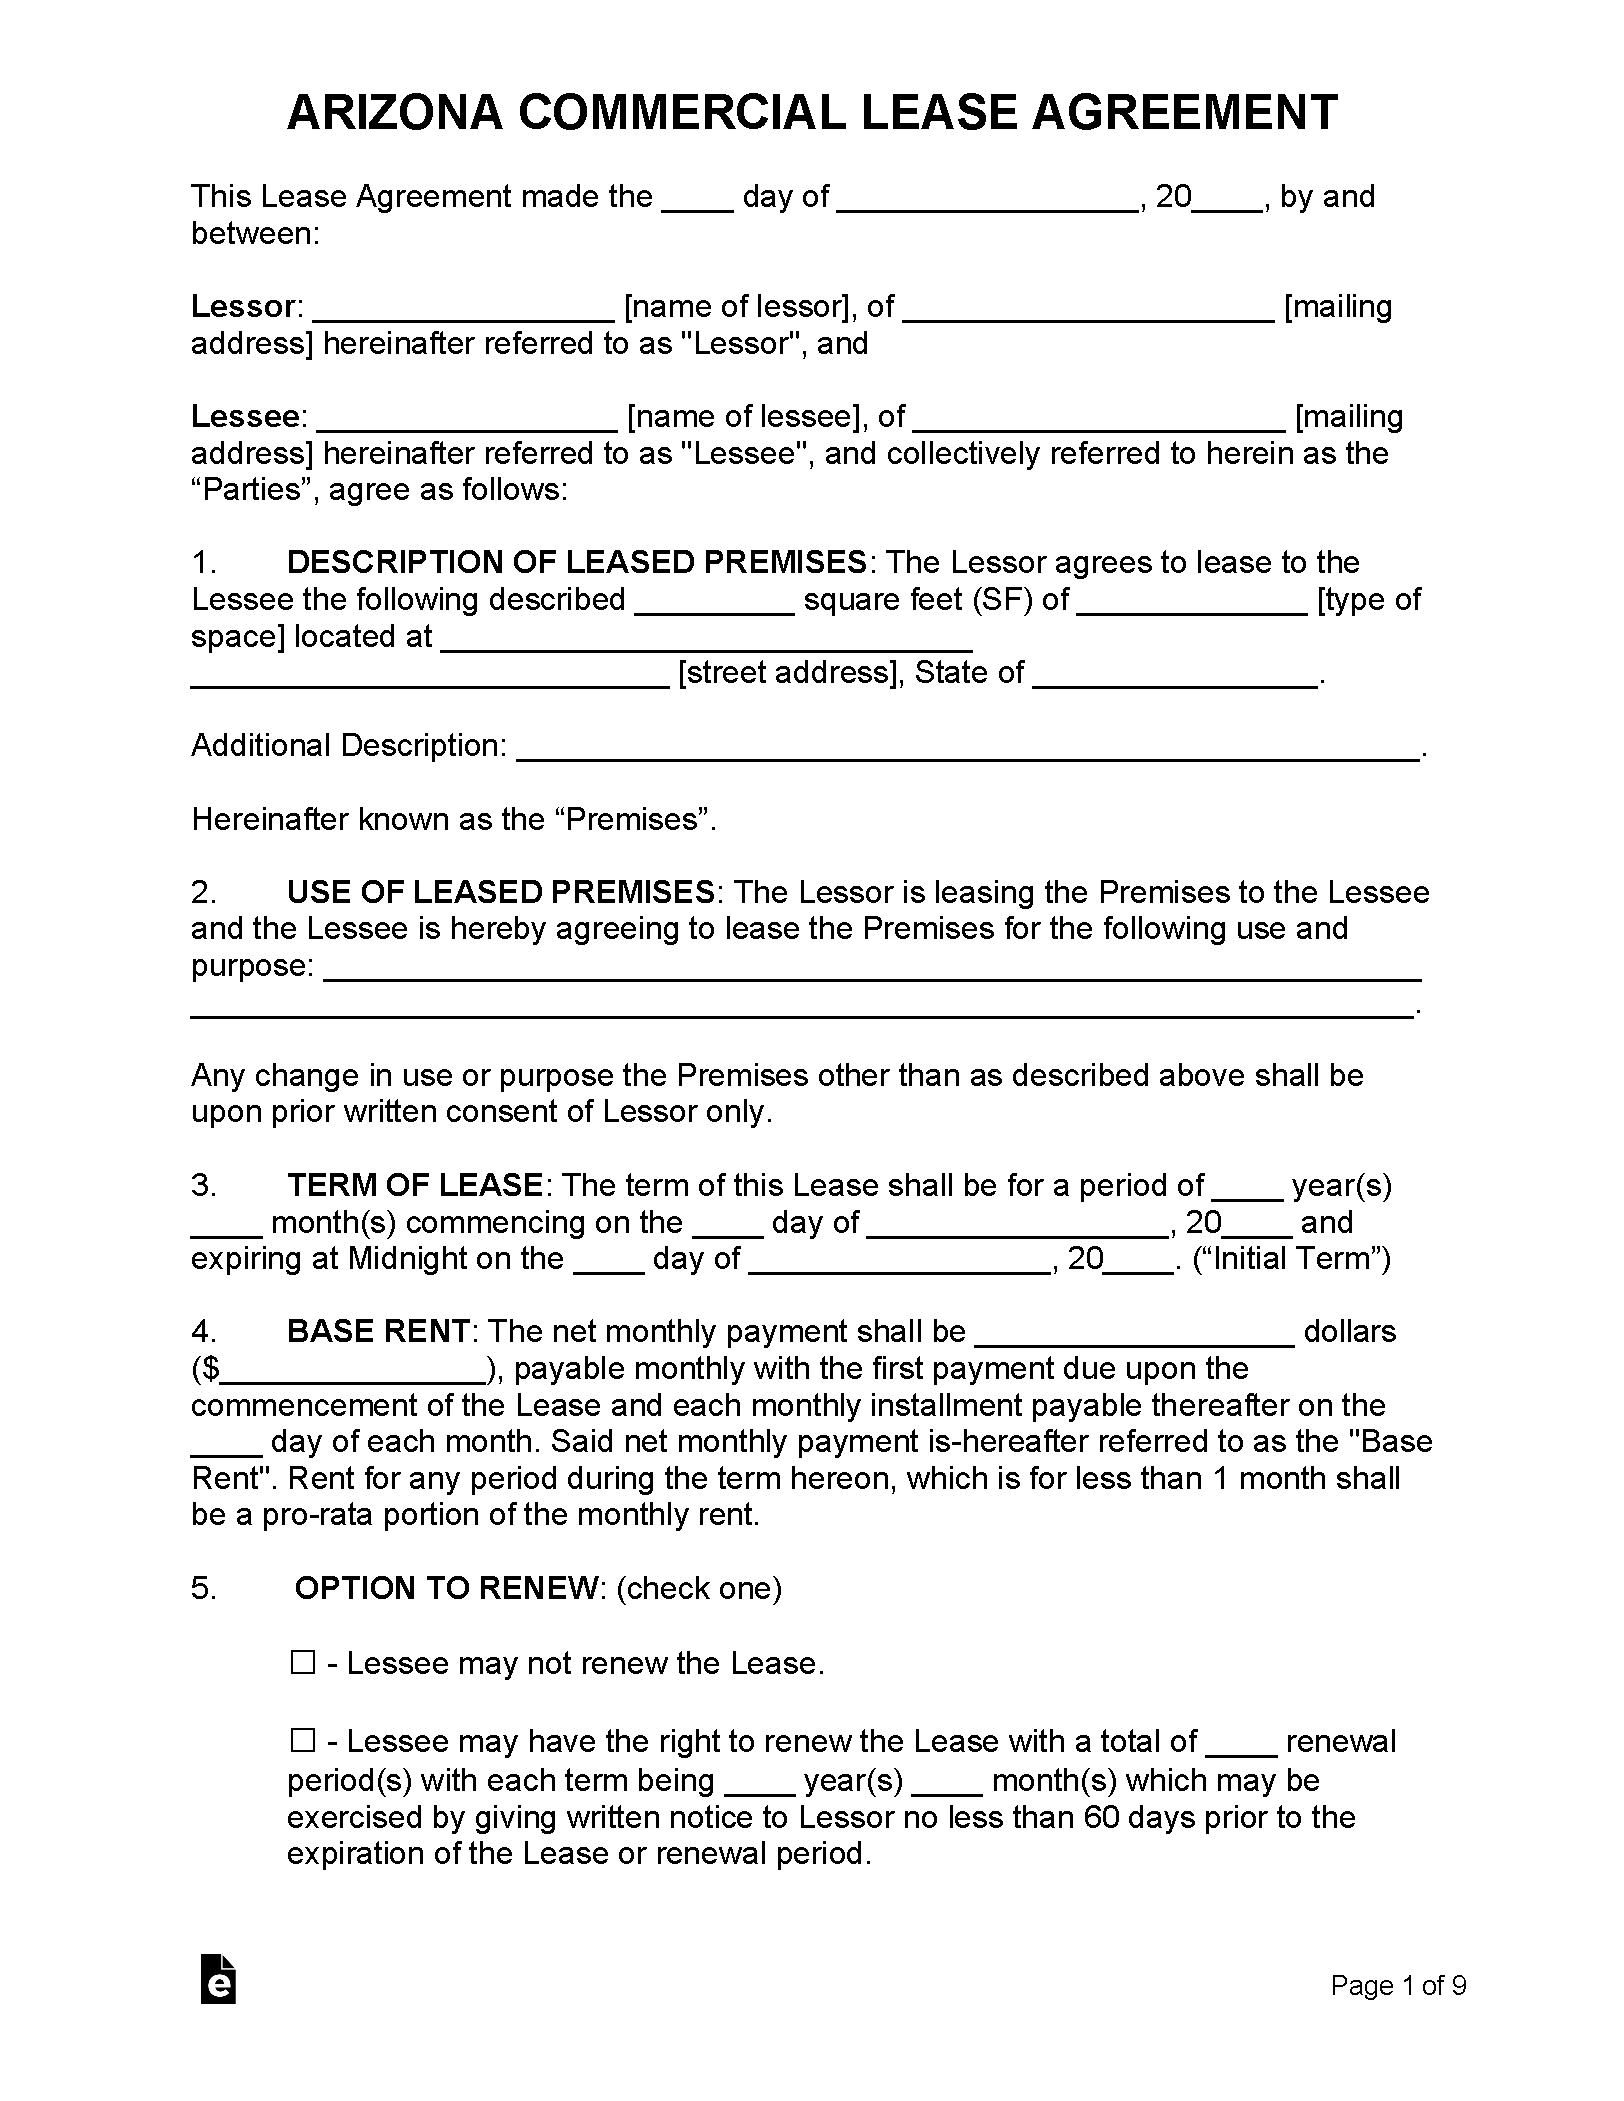 free-arizona-commercial-lease-agreement-template-pdf-word